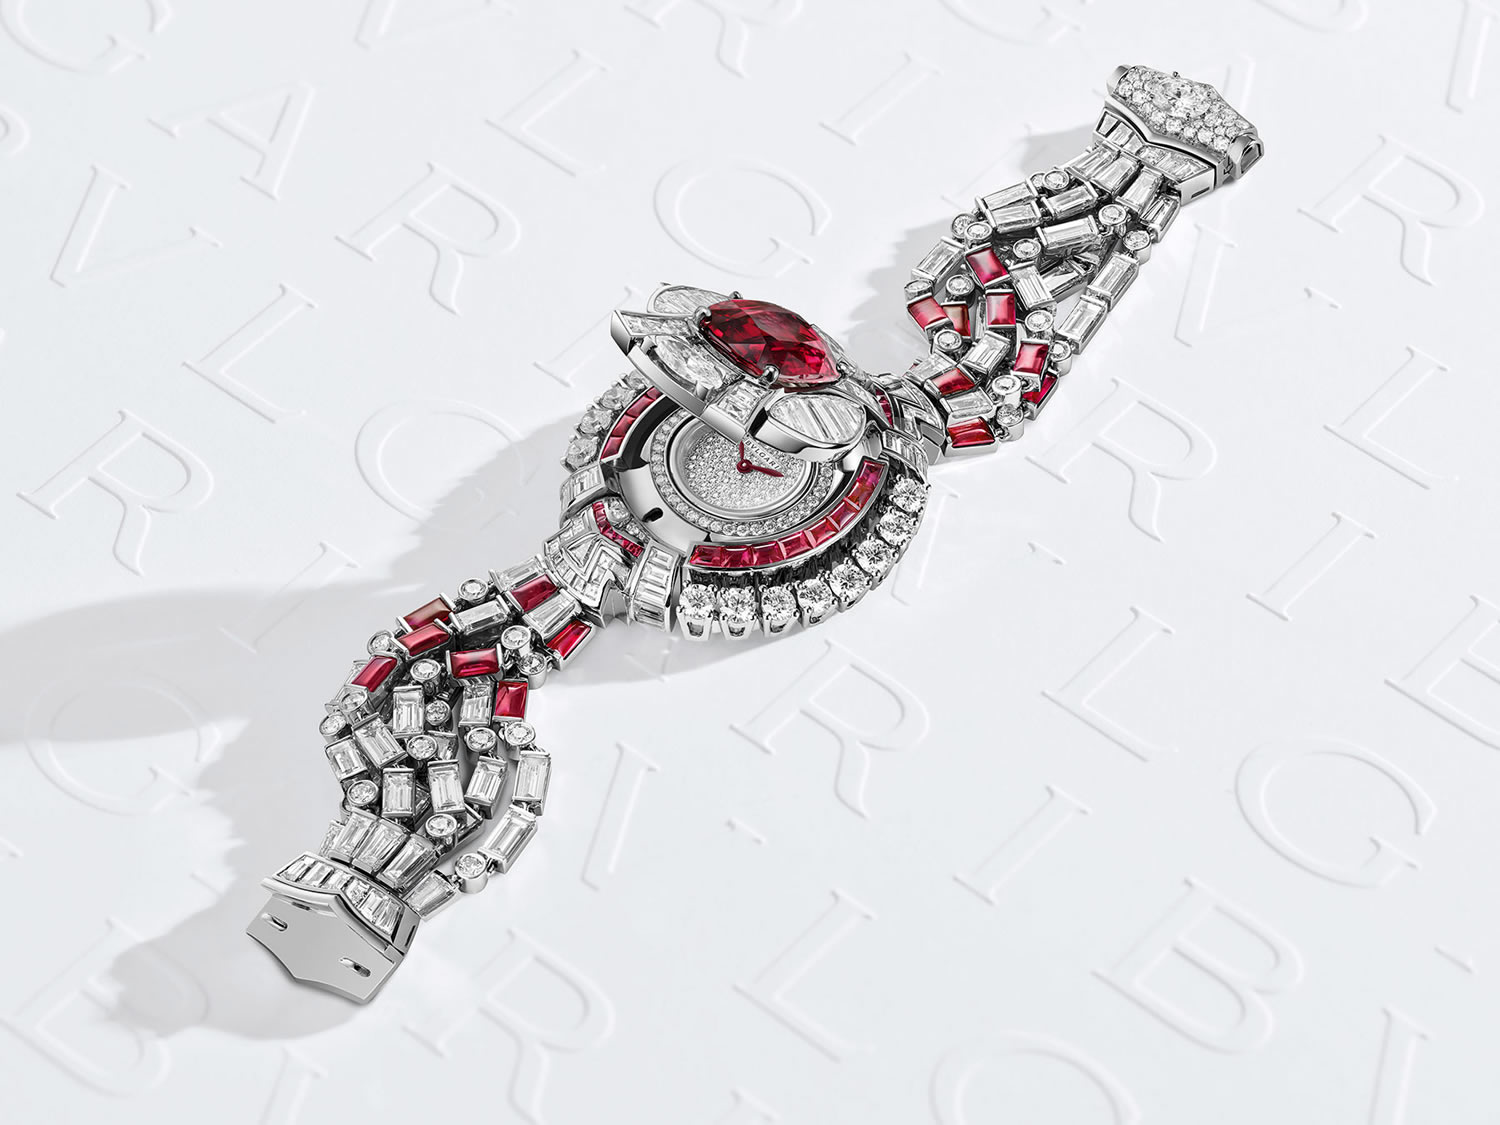 Why Bulgari's Magnifica high jewellery is amongst the best in the world